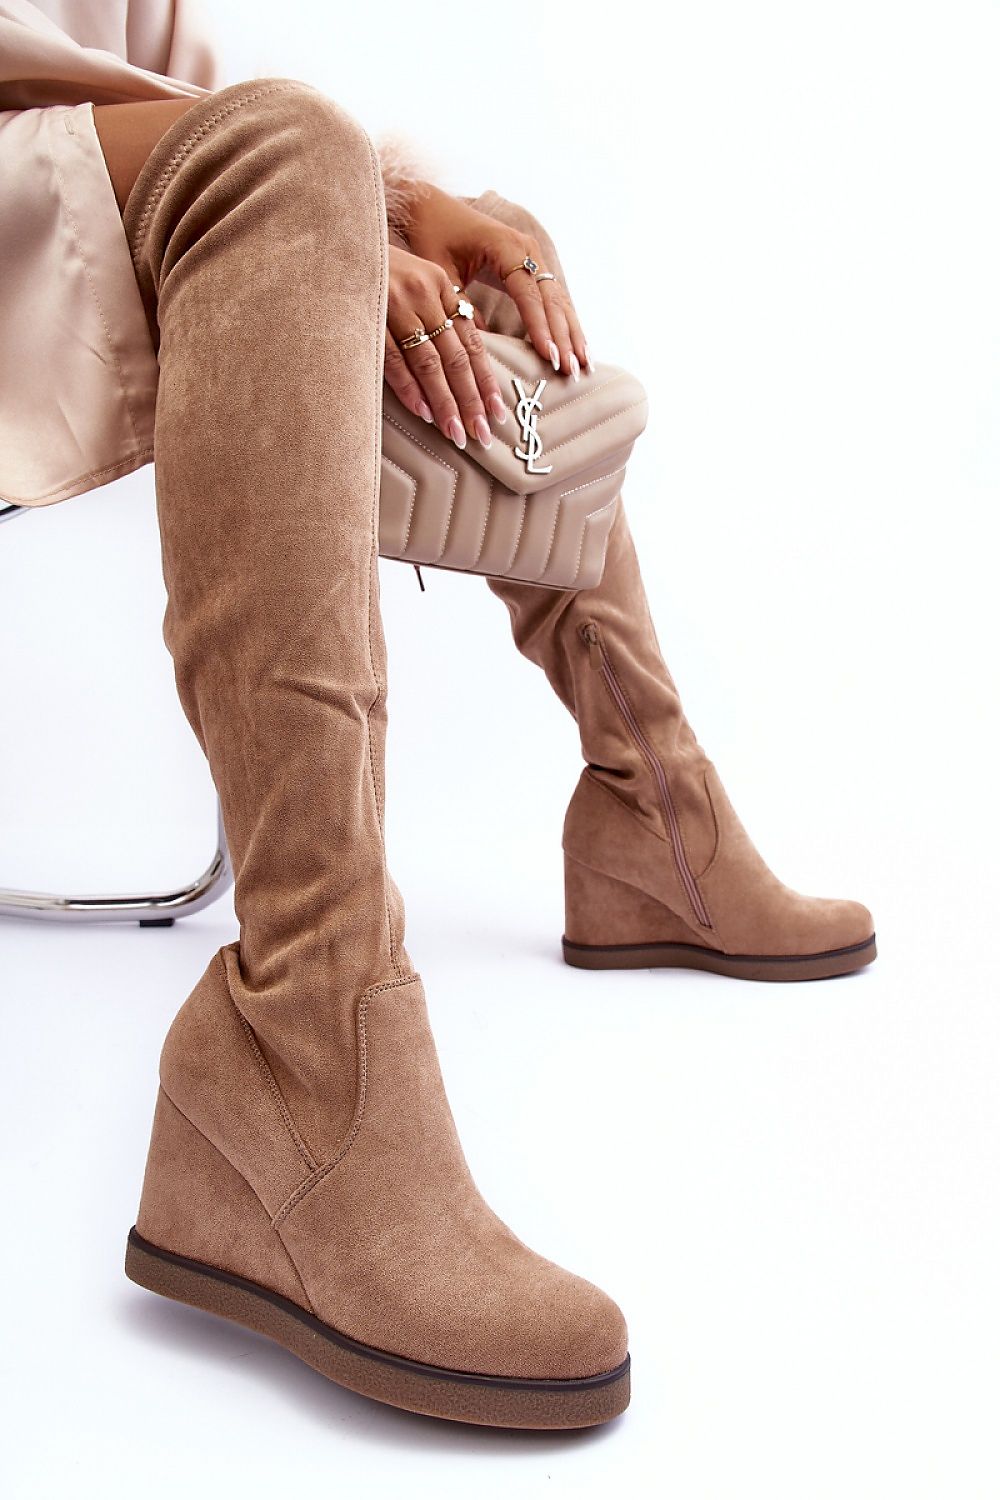 Over The Knee Suede Boots Brown